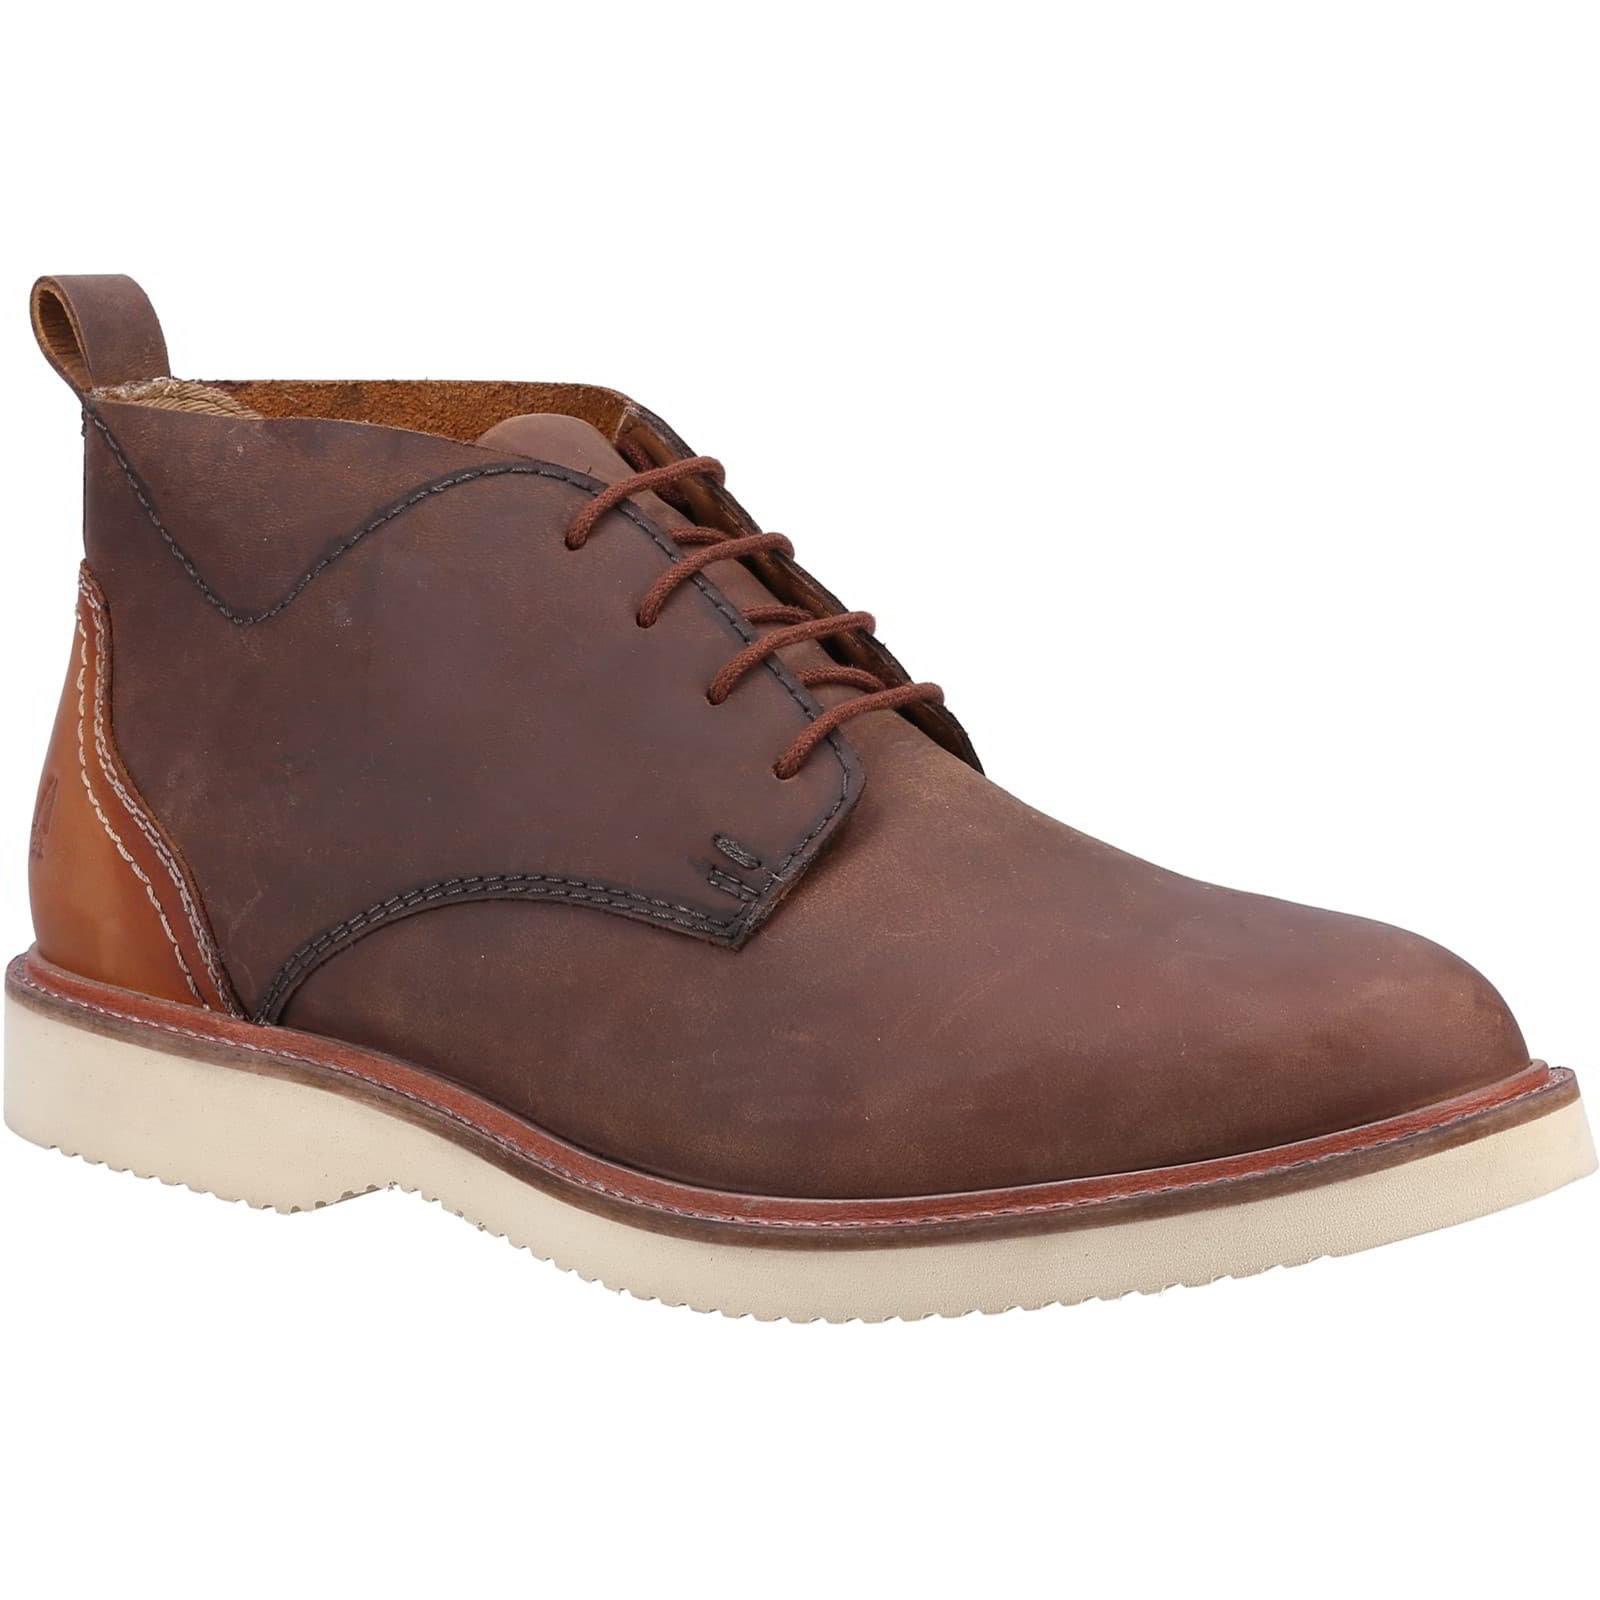 Hush Puppies Men's Wesley Lace UP Desert Chukka Ankle Boots - UK 11